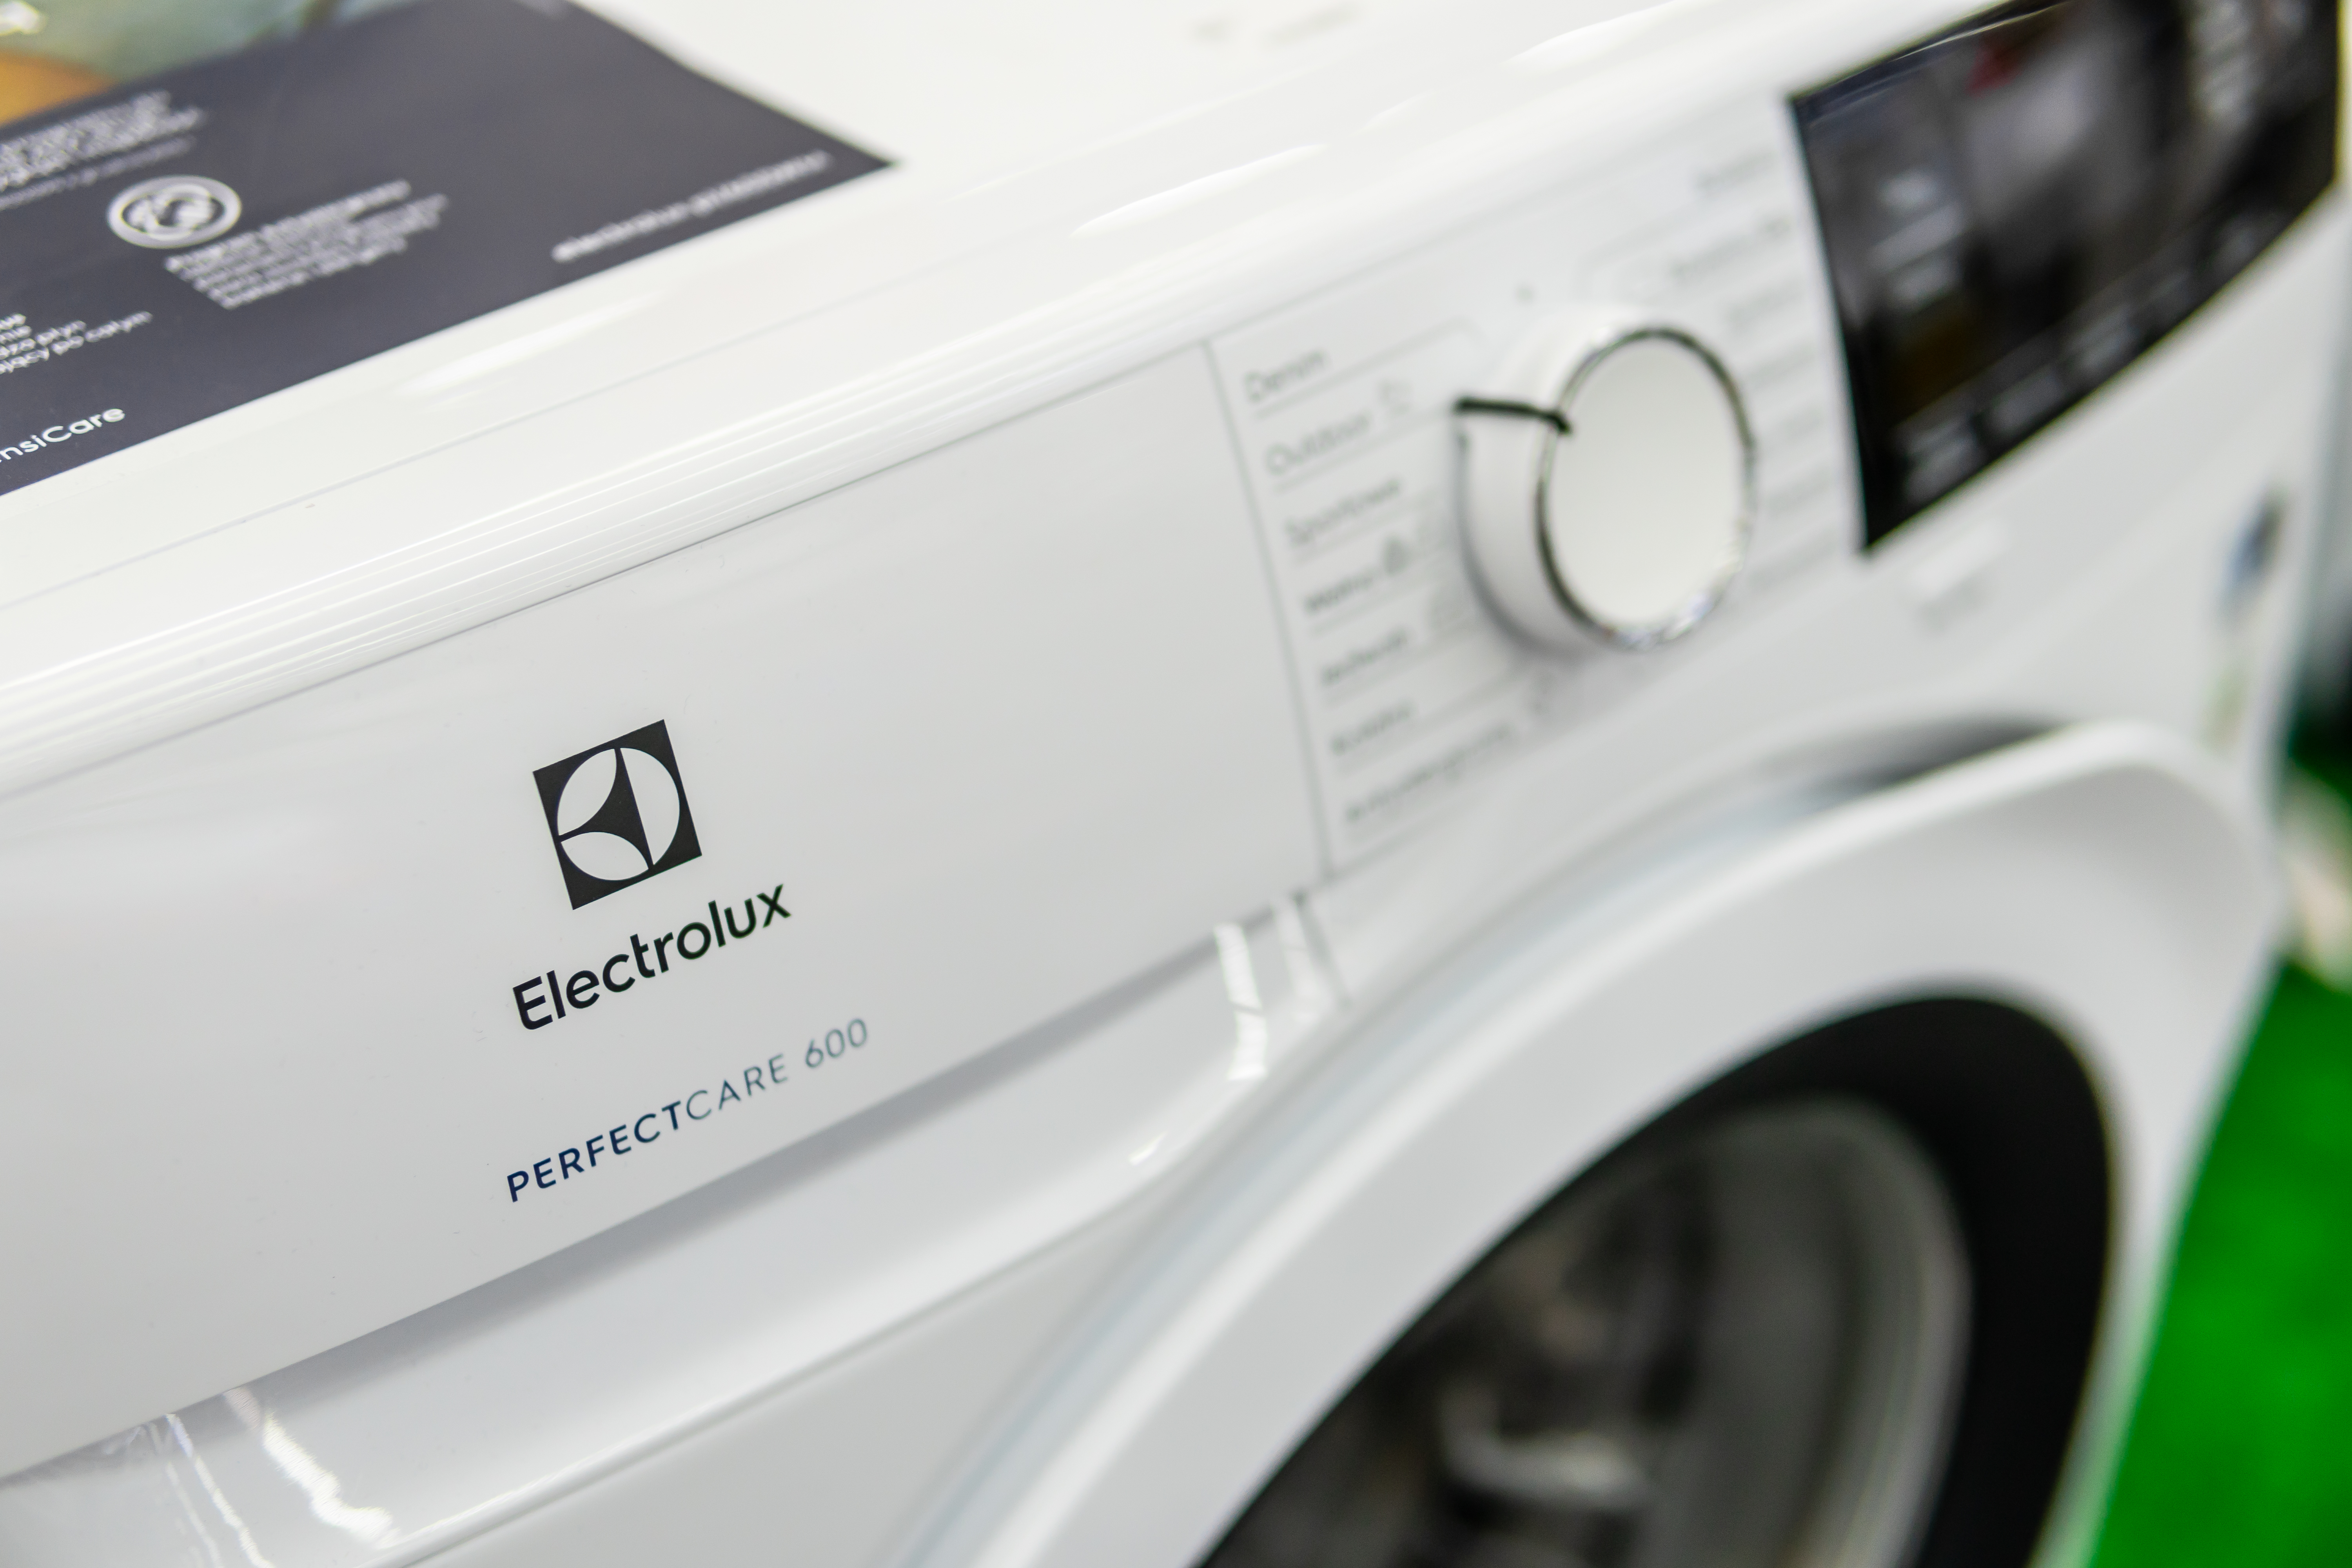 The Electrolux Perfect Care 600 Washing Machine | Source: Shutterstock